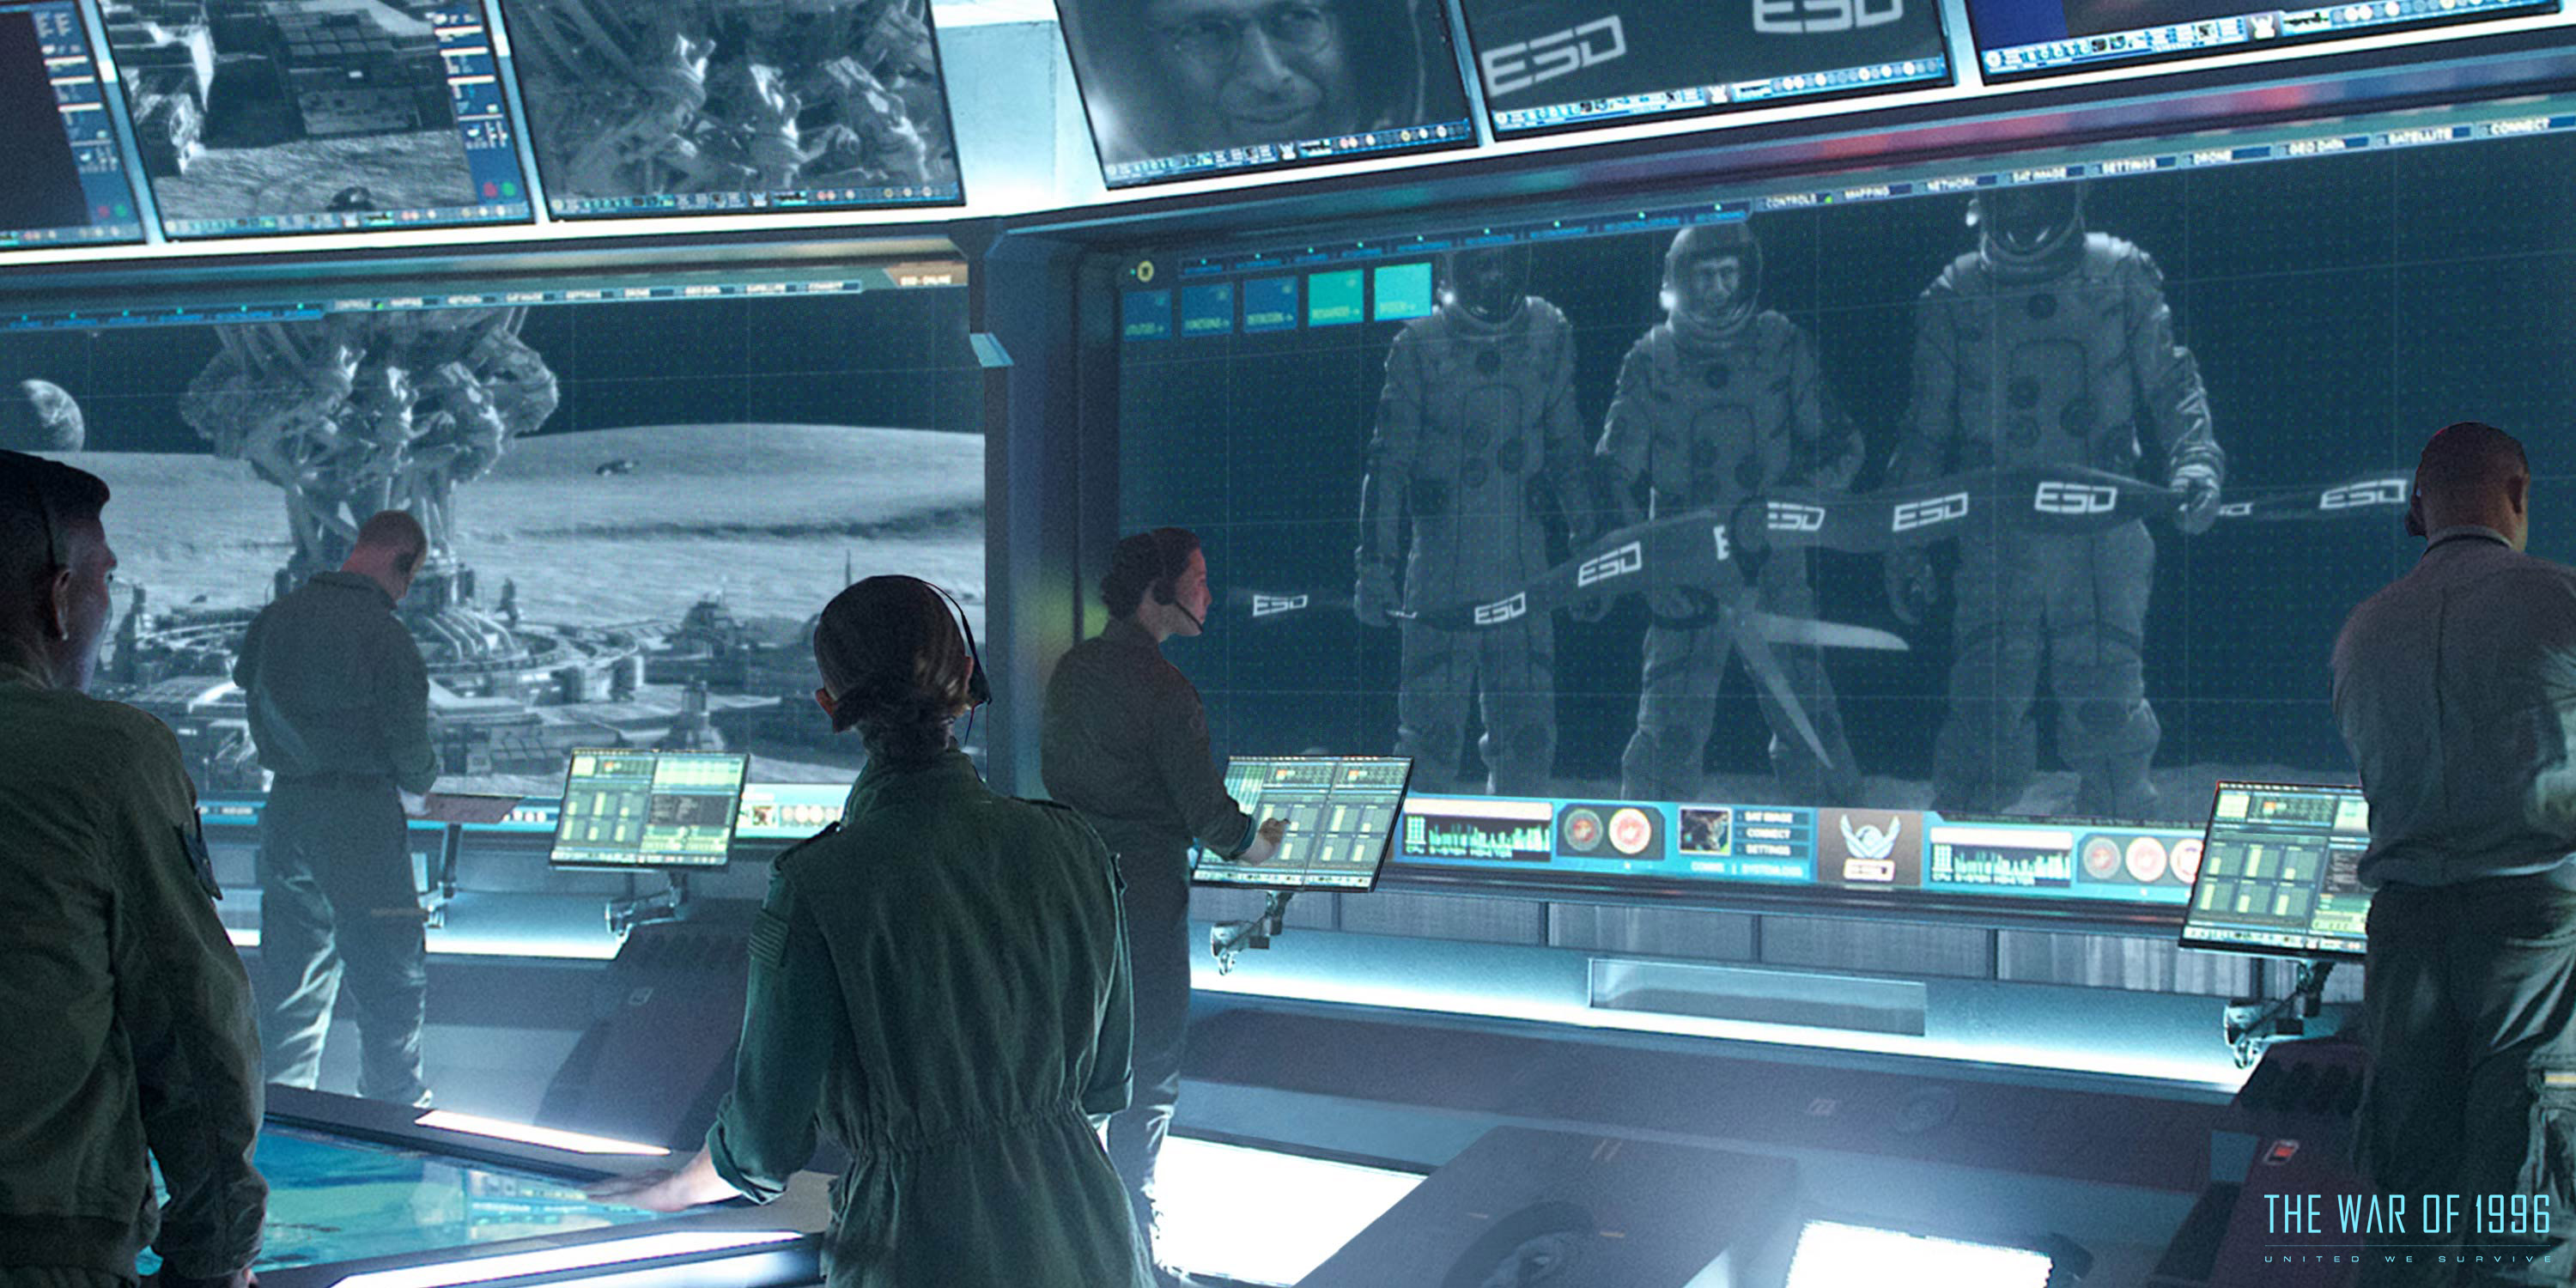 MoonBaseOperational Independence Day: Resurgence Viral Site Launched "War Of 1996"